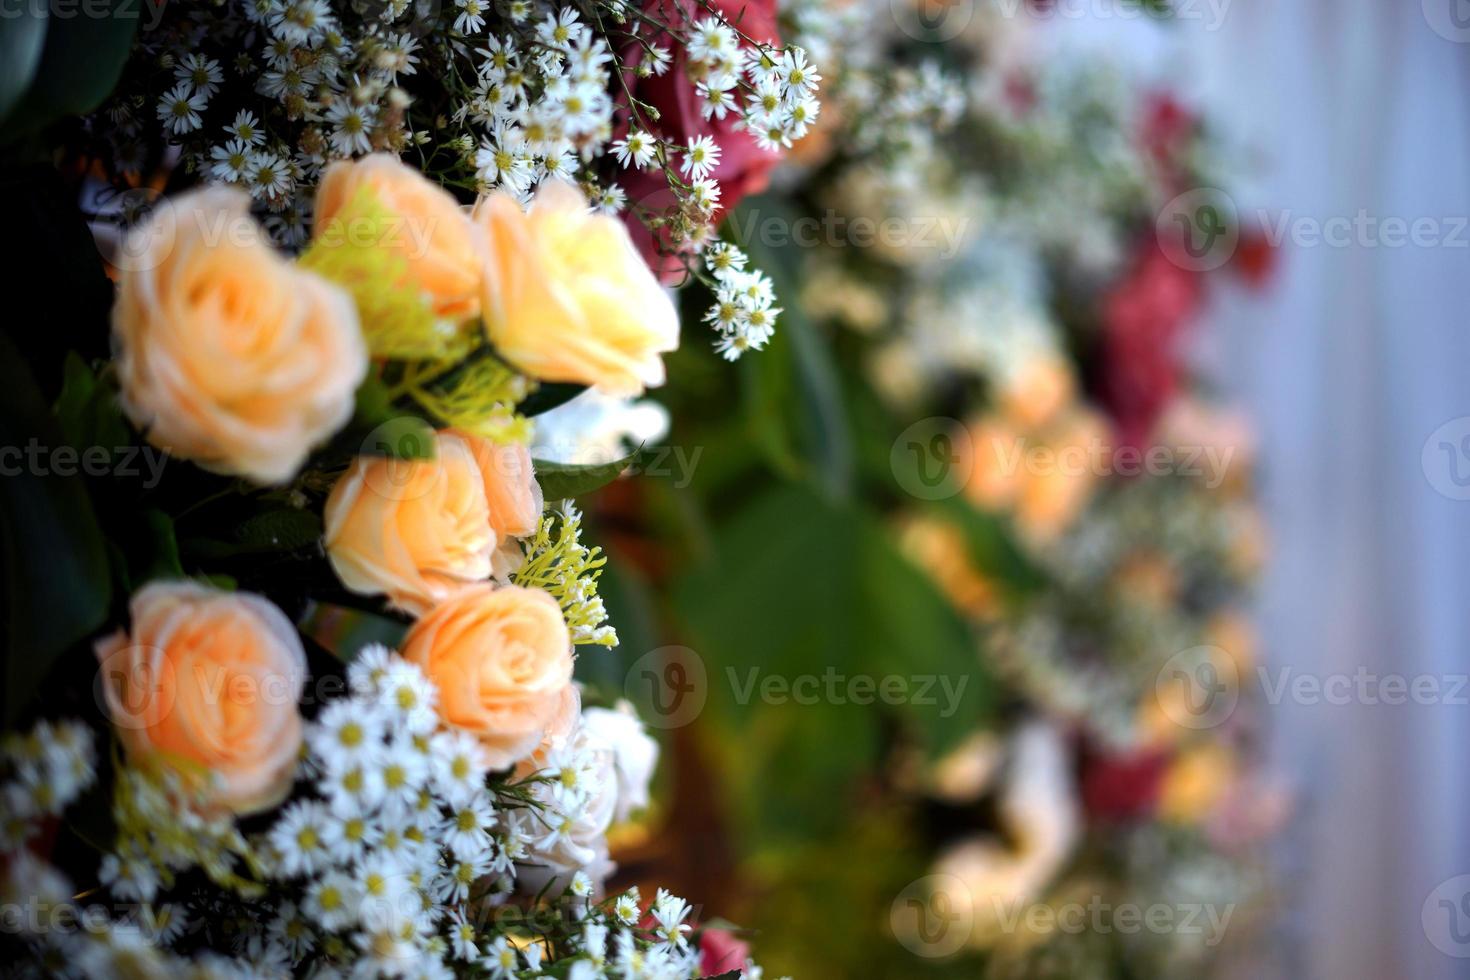 Flowers in the Garden for Wedding Ceremony photo